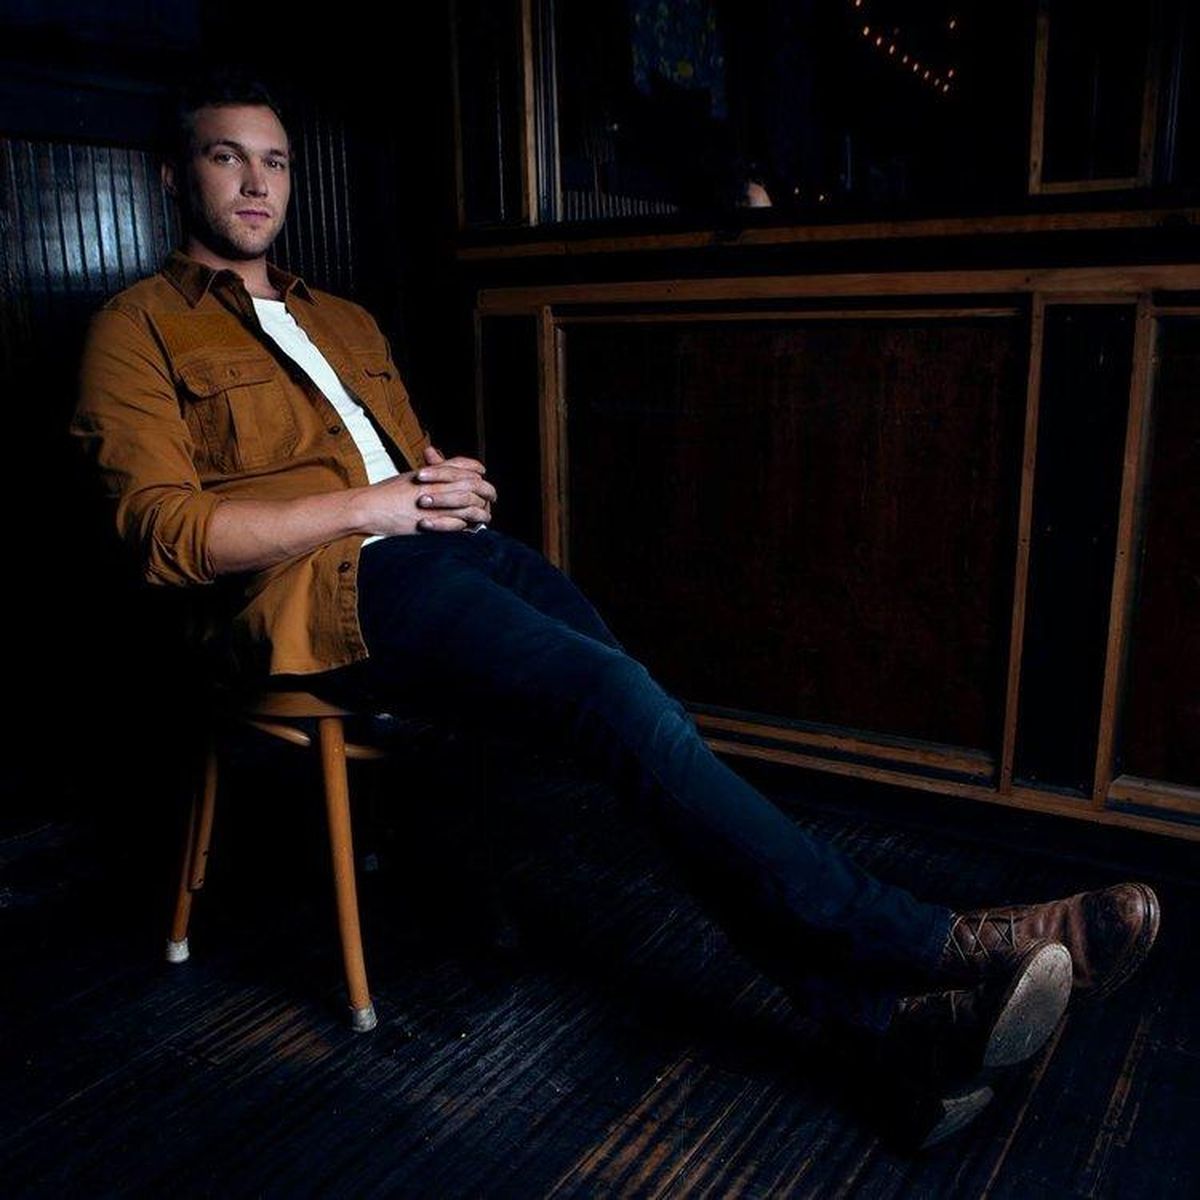 Phillip Phillips will perform at the Festival of Sandpoint as part of his ongoing co-headlining tour with Gavin DeGraw. (Courtesy of Mick Management)